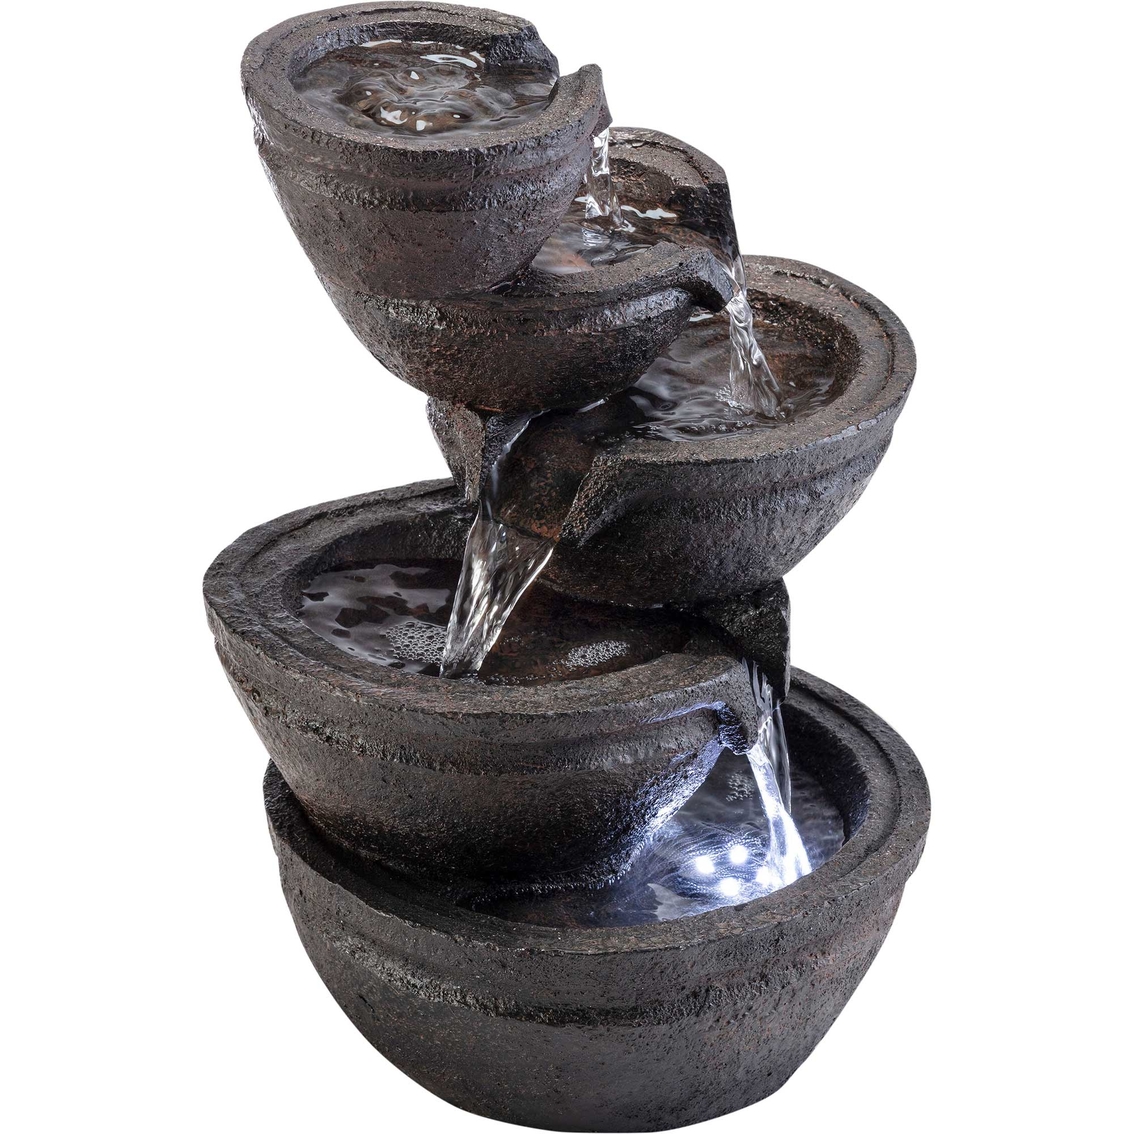 Alpine Tiering Bowls Fountain with White LED Lights - Image 3 of 6